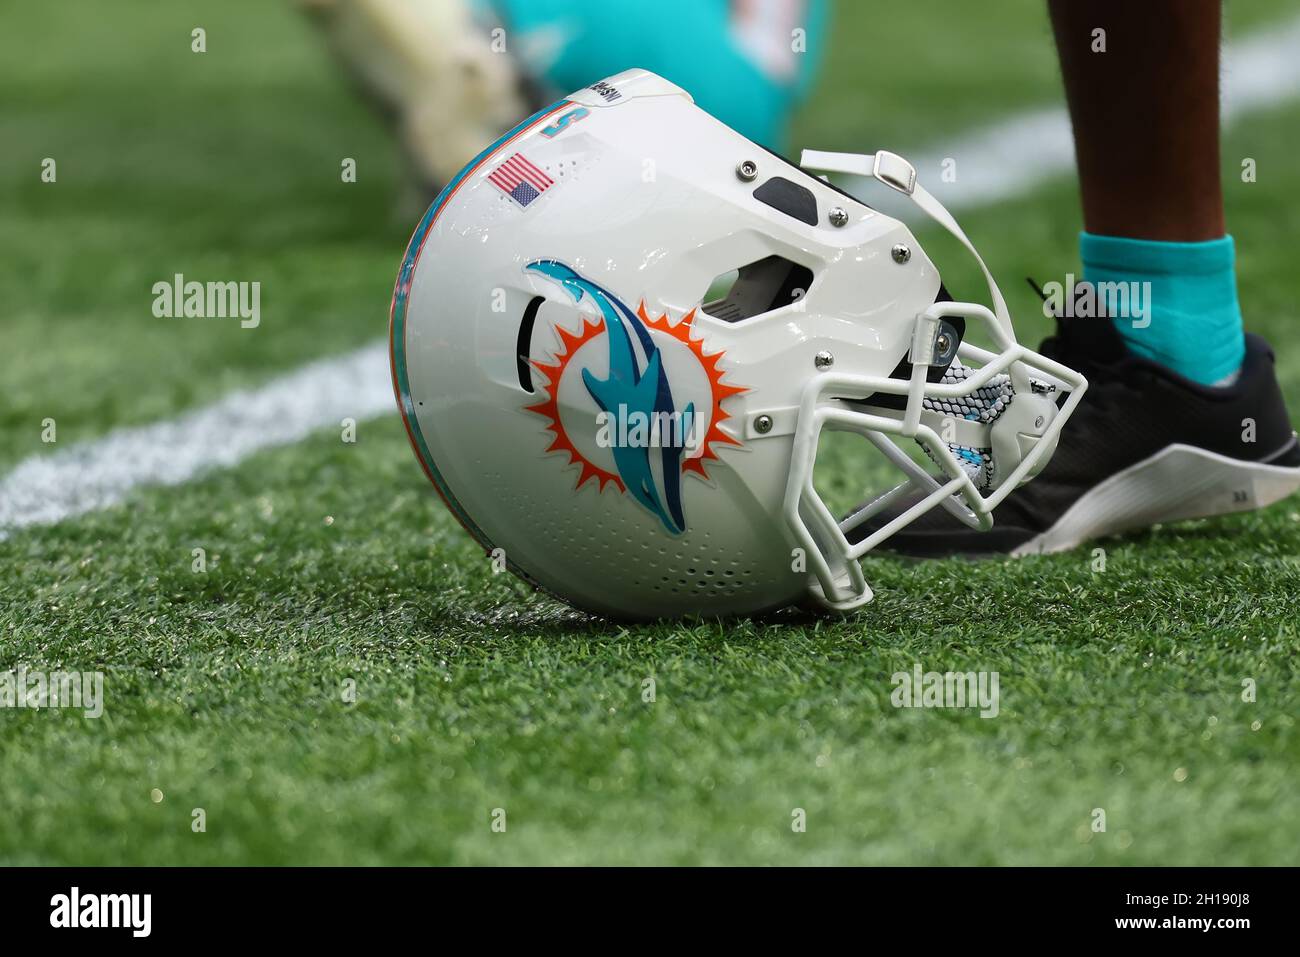 Miami Dolphins Helmet High Resolution Stock Photography and Images - Alamy